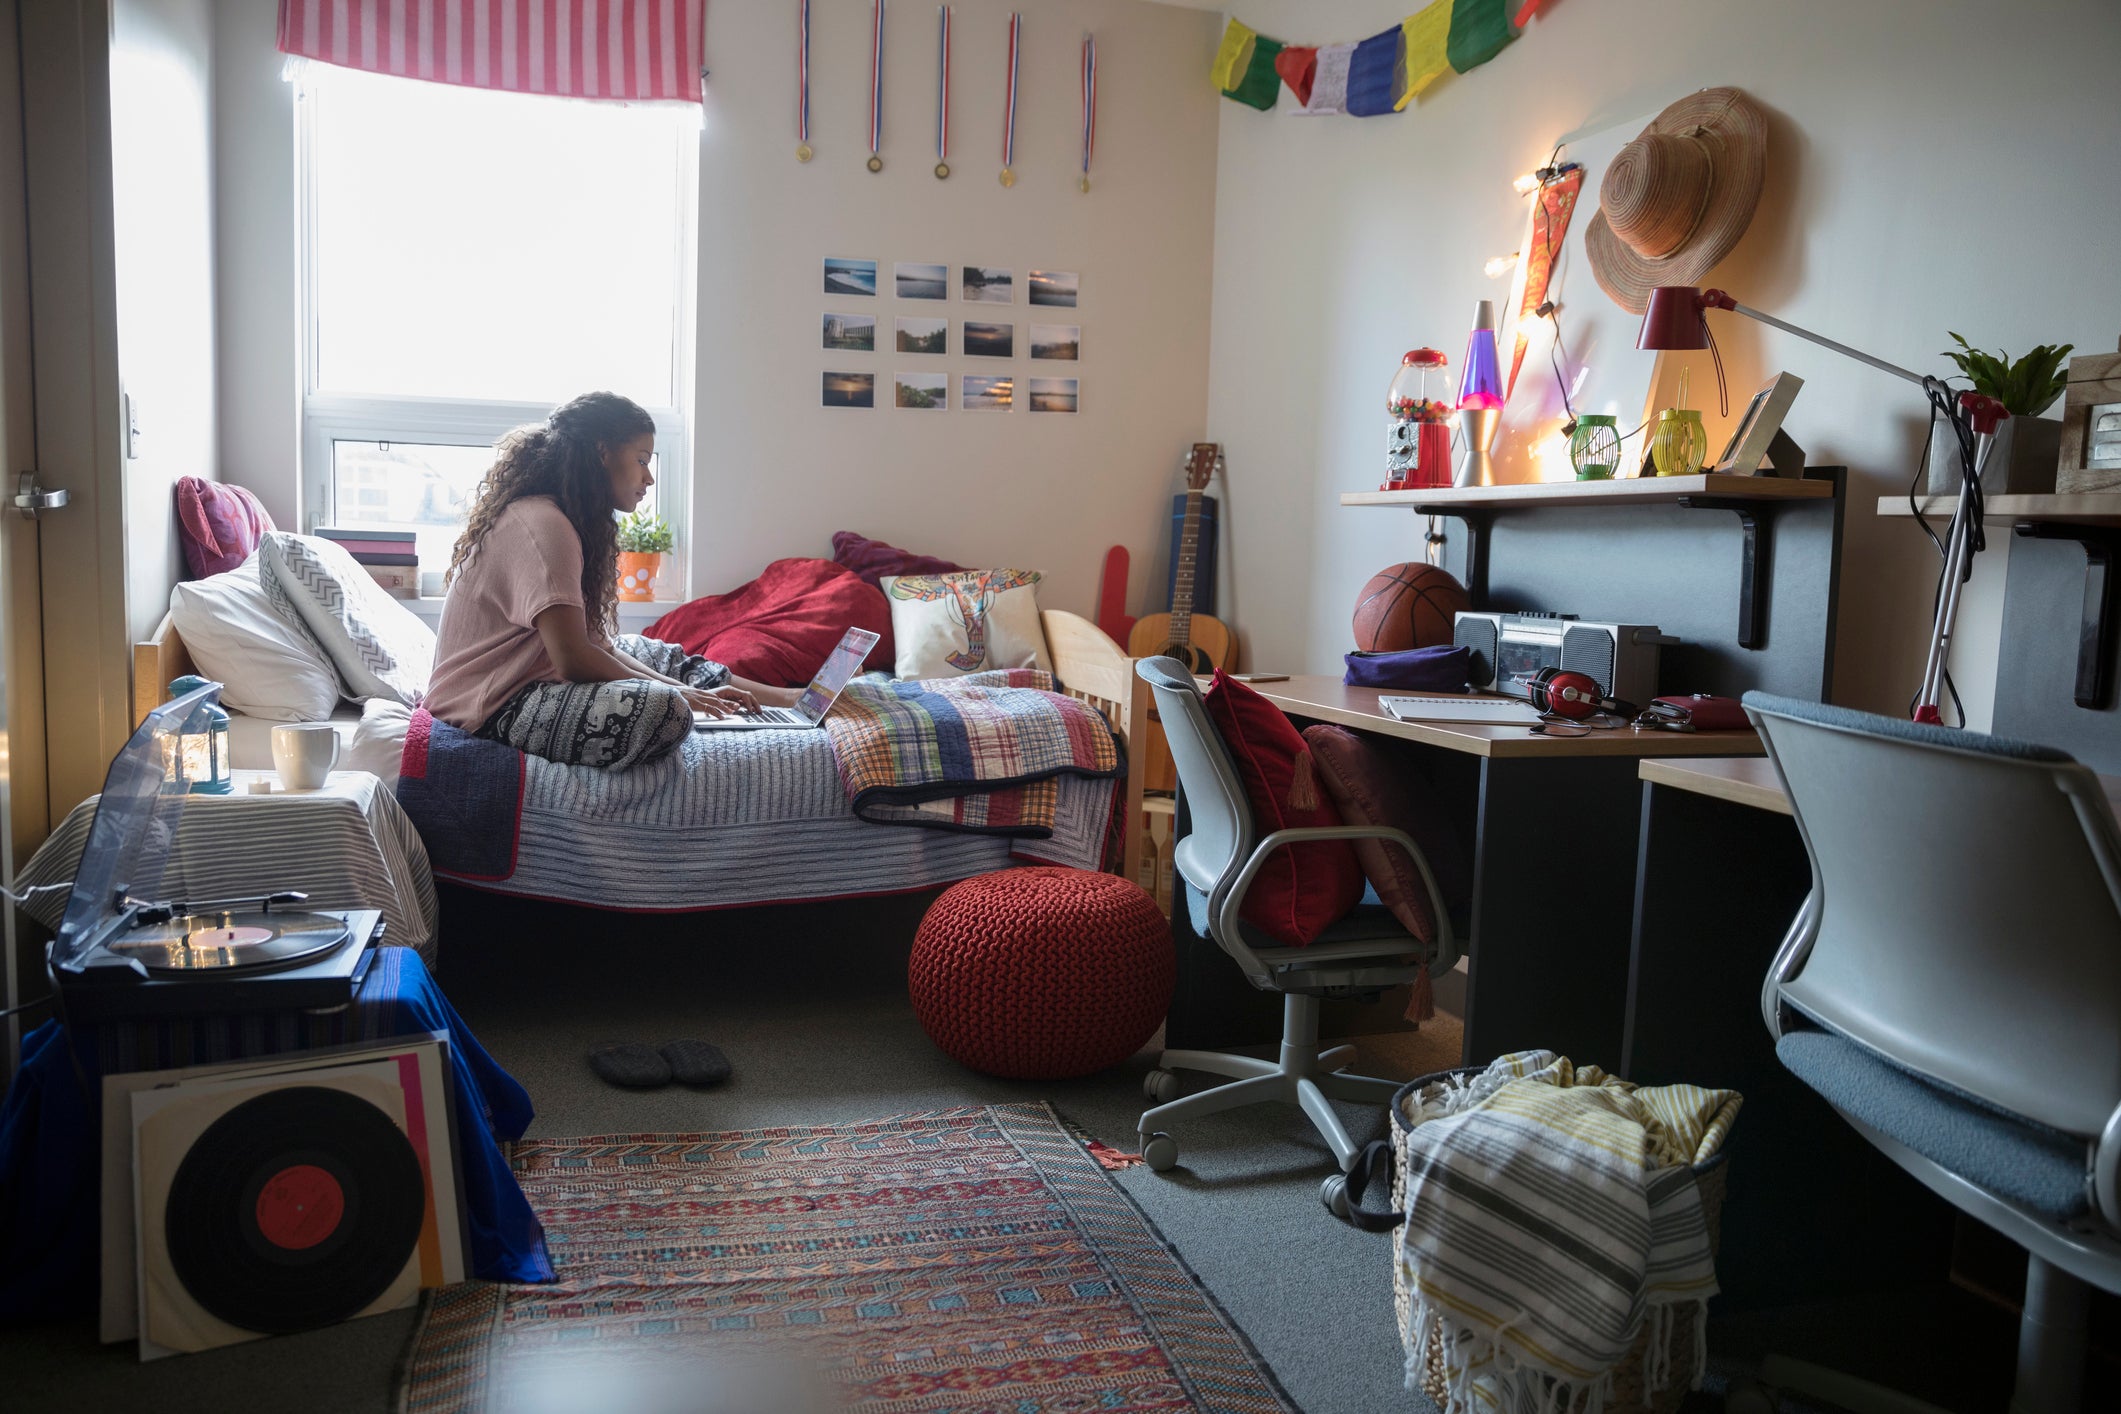 Female college student studying at laptop on bed in dorm room